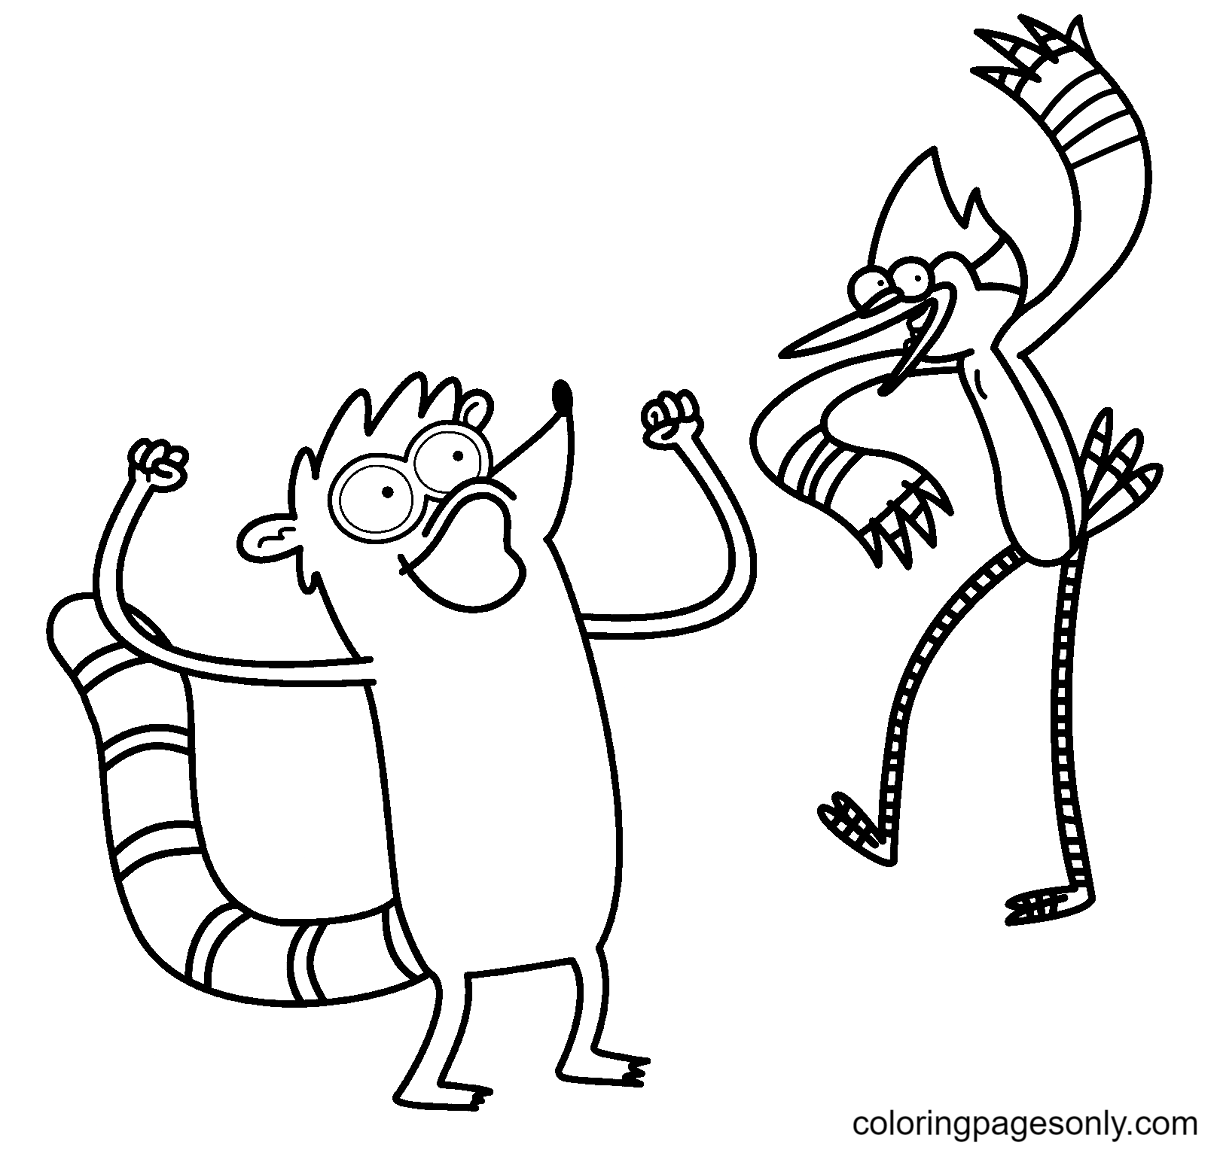 Funny Mordecai And Rigby Coloring Pages